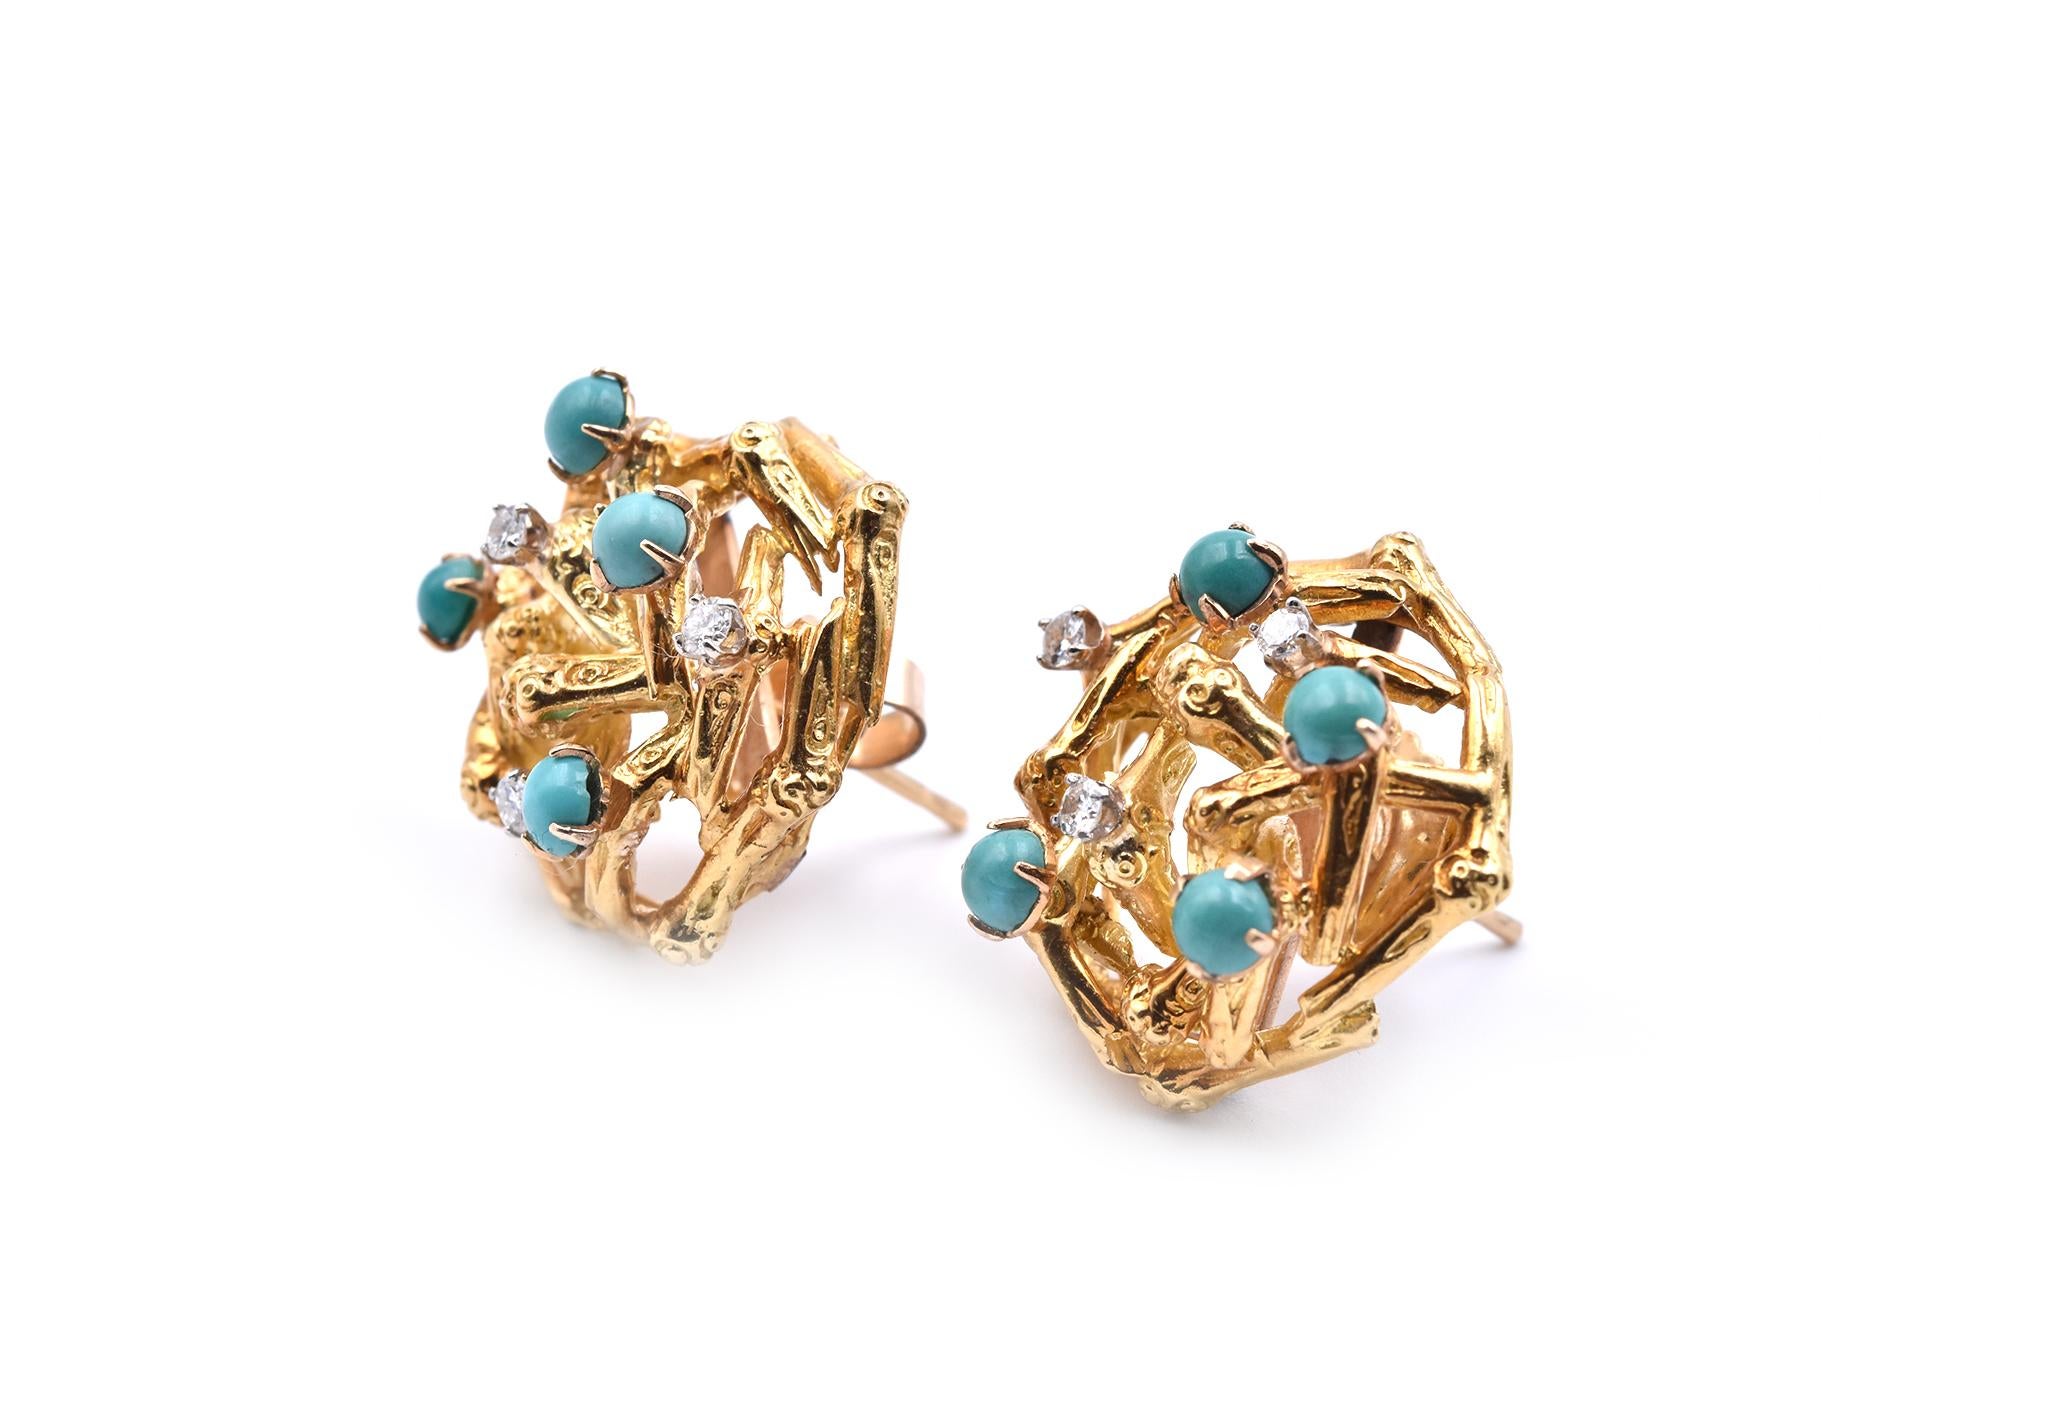 Round Cut 18 Karat Yellow Gold Vintage 1960s Diamond and Turquoise Earrings